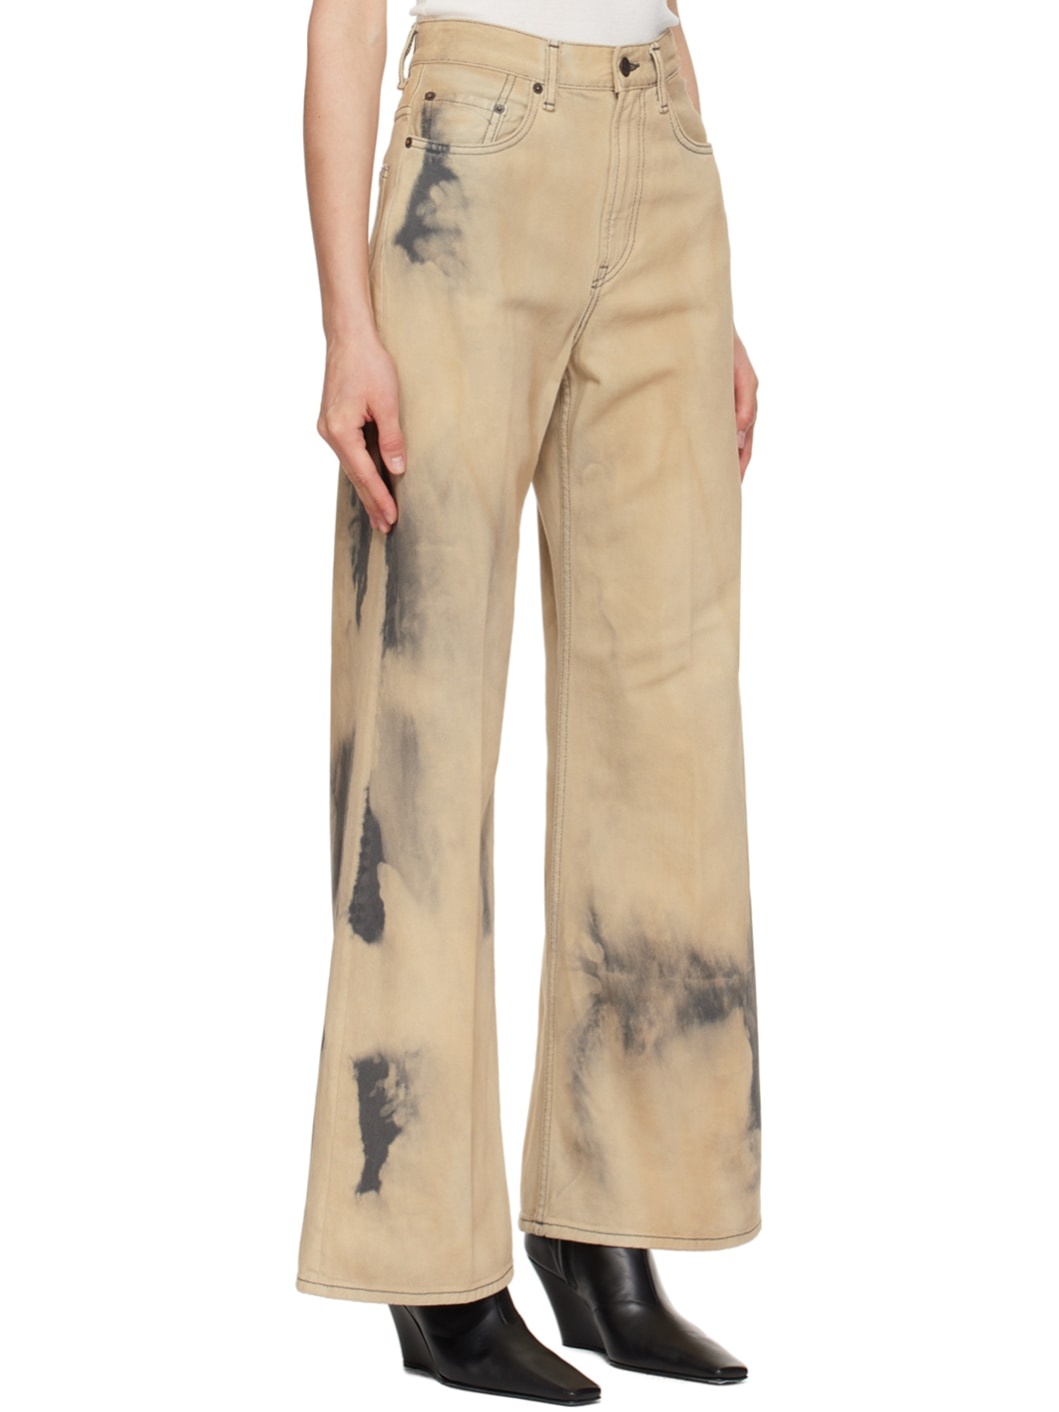 Beige & Black Relaxed-Fit Jeans - 2